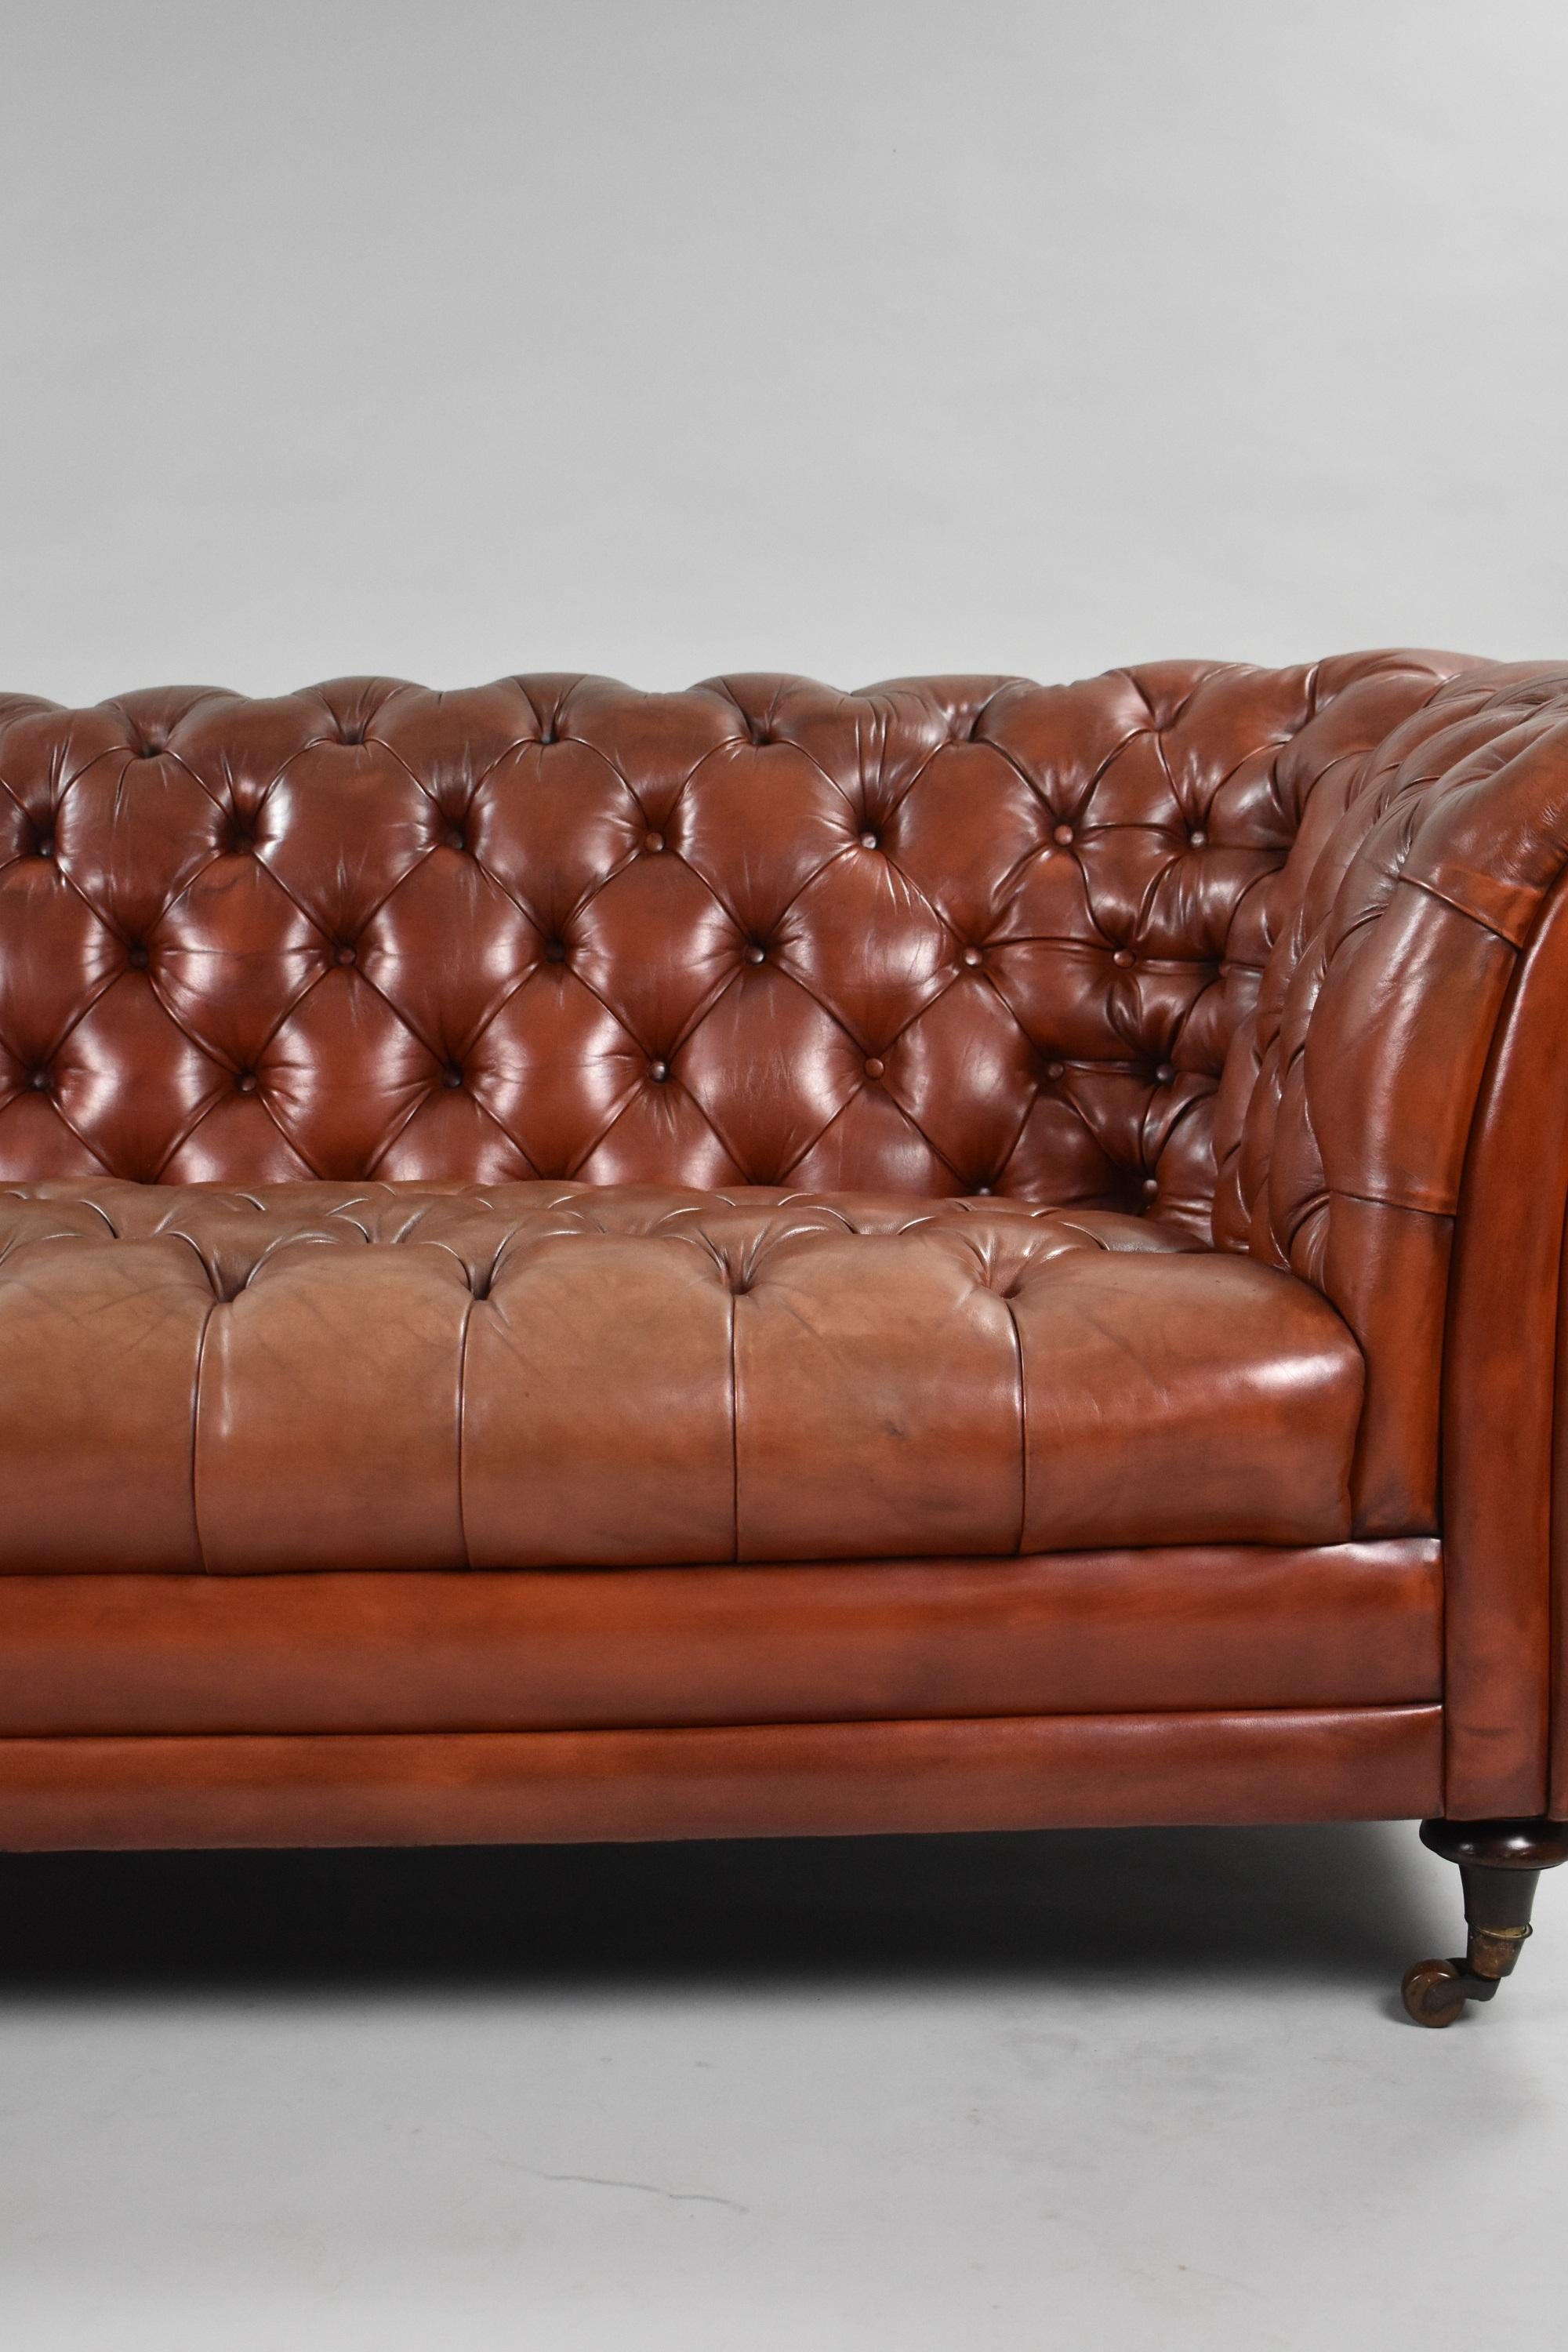 Early 20th Century Victorian Style Leather Chesterfield Sofa